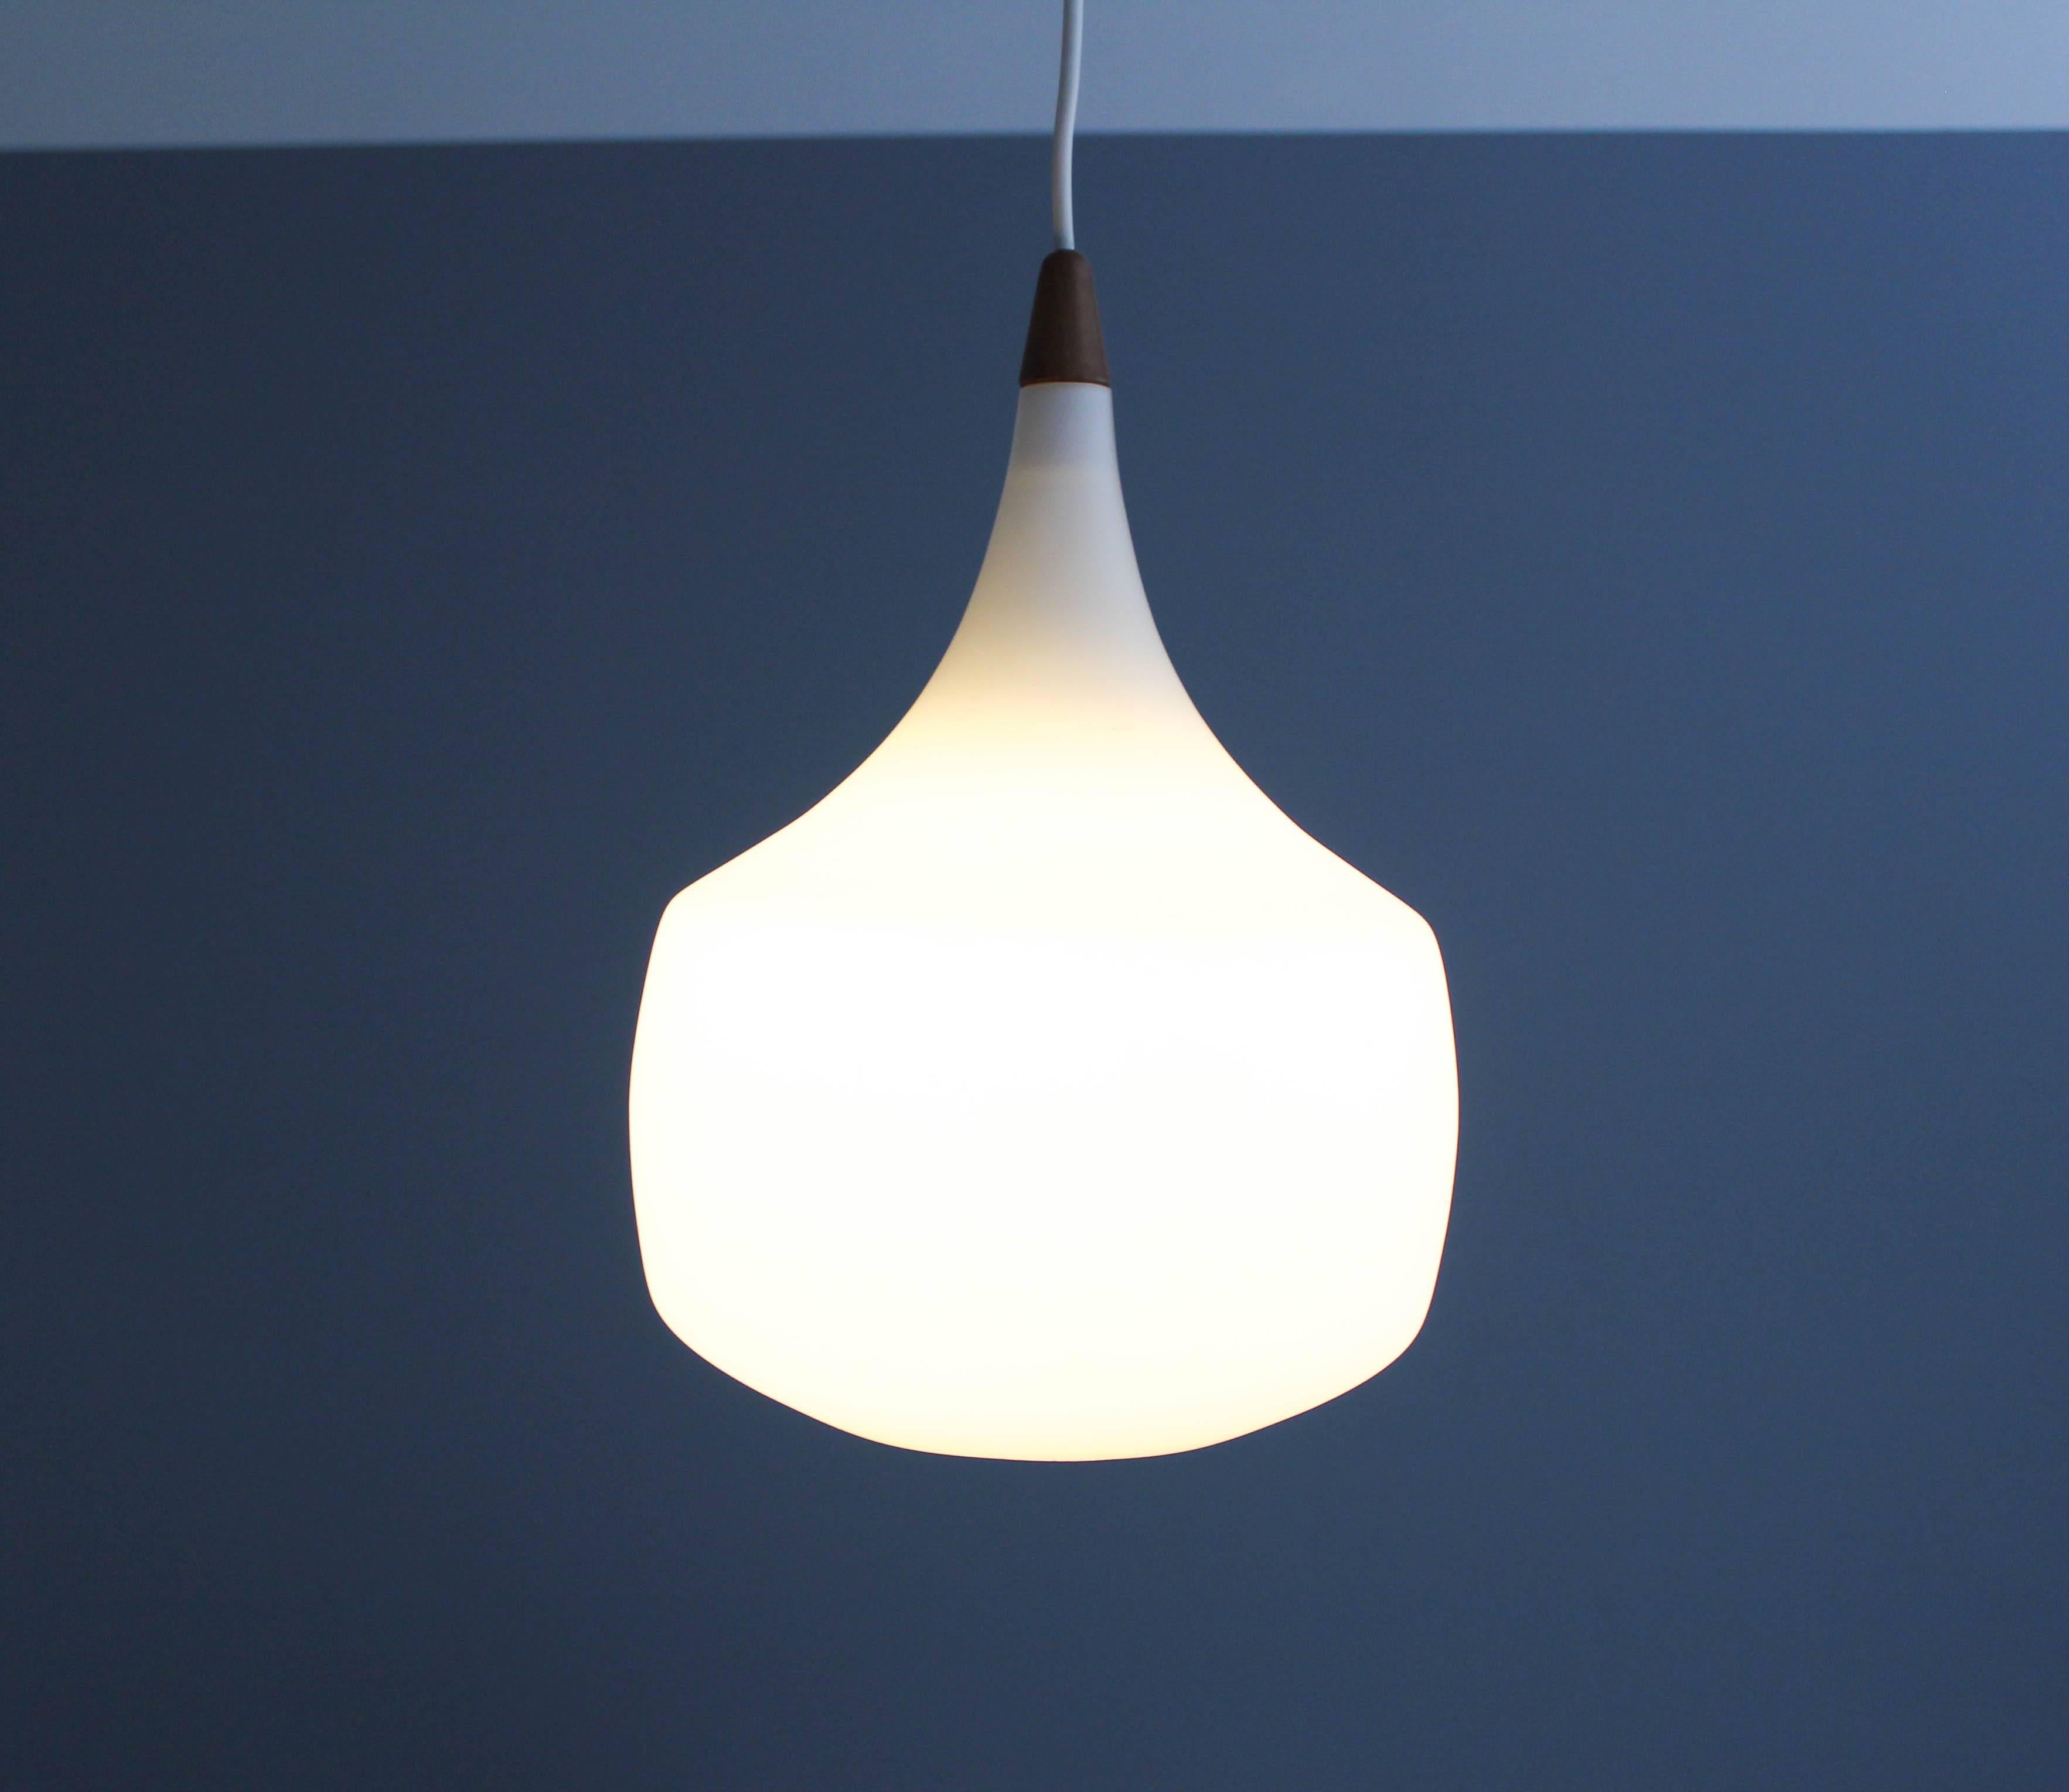 Mid-century opaline glass and pendant lamp by Swedish manufacturer Luxus, designed by Uno and Östen Kristiansson. Luxus was a Vittsjö based Swedish manufacturer especially known for their high quality lamps. 

This lamp is in very good vintage